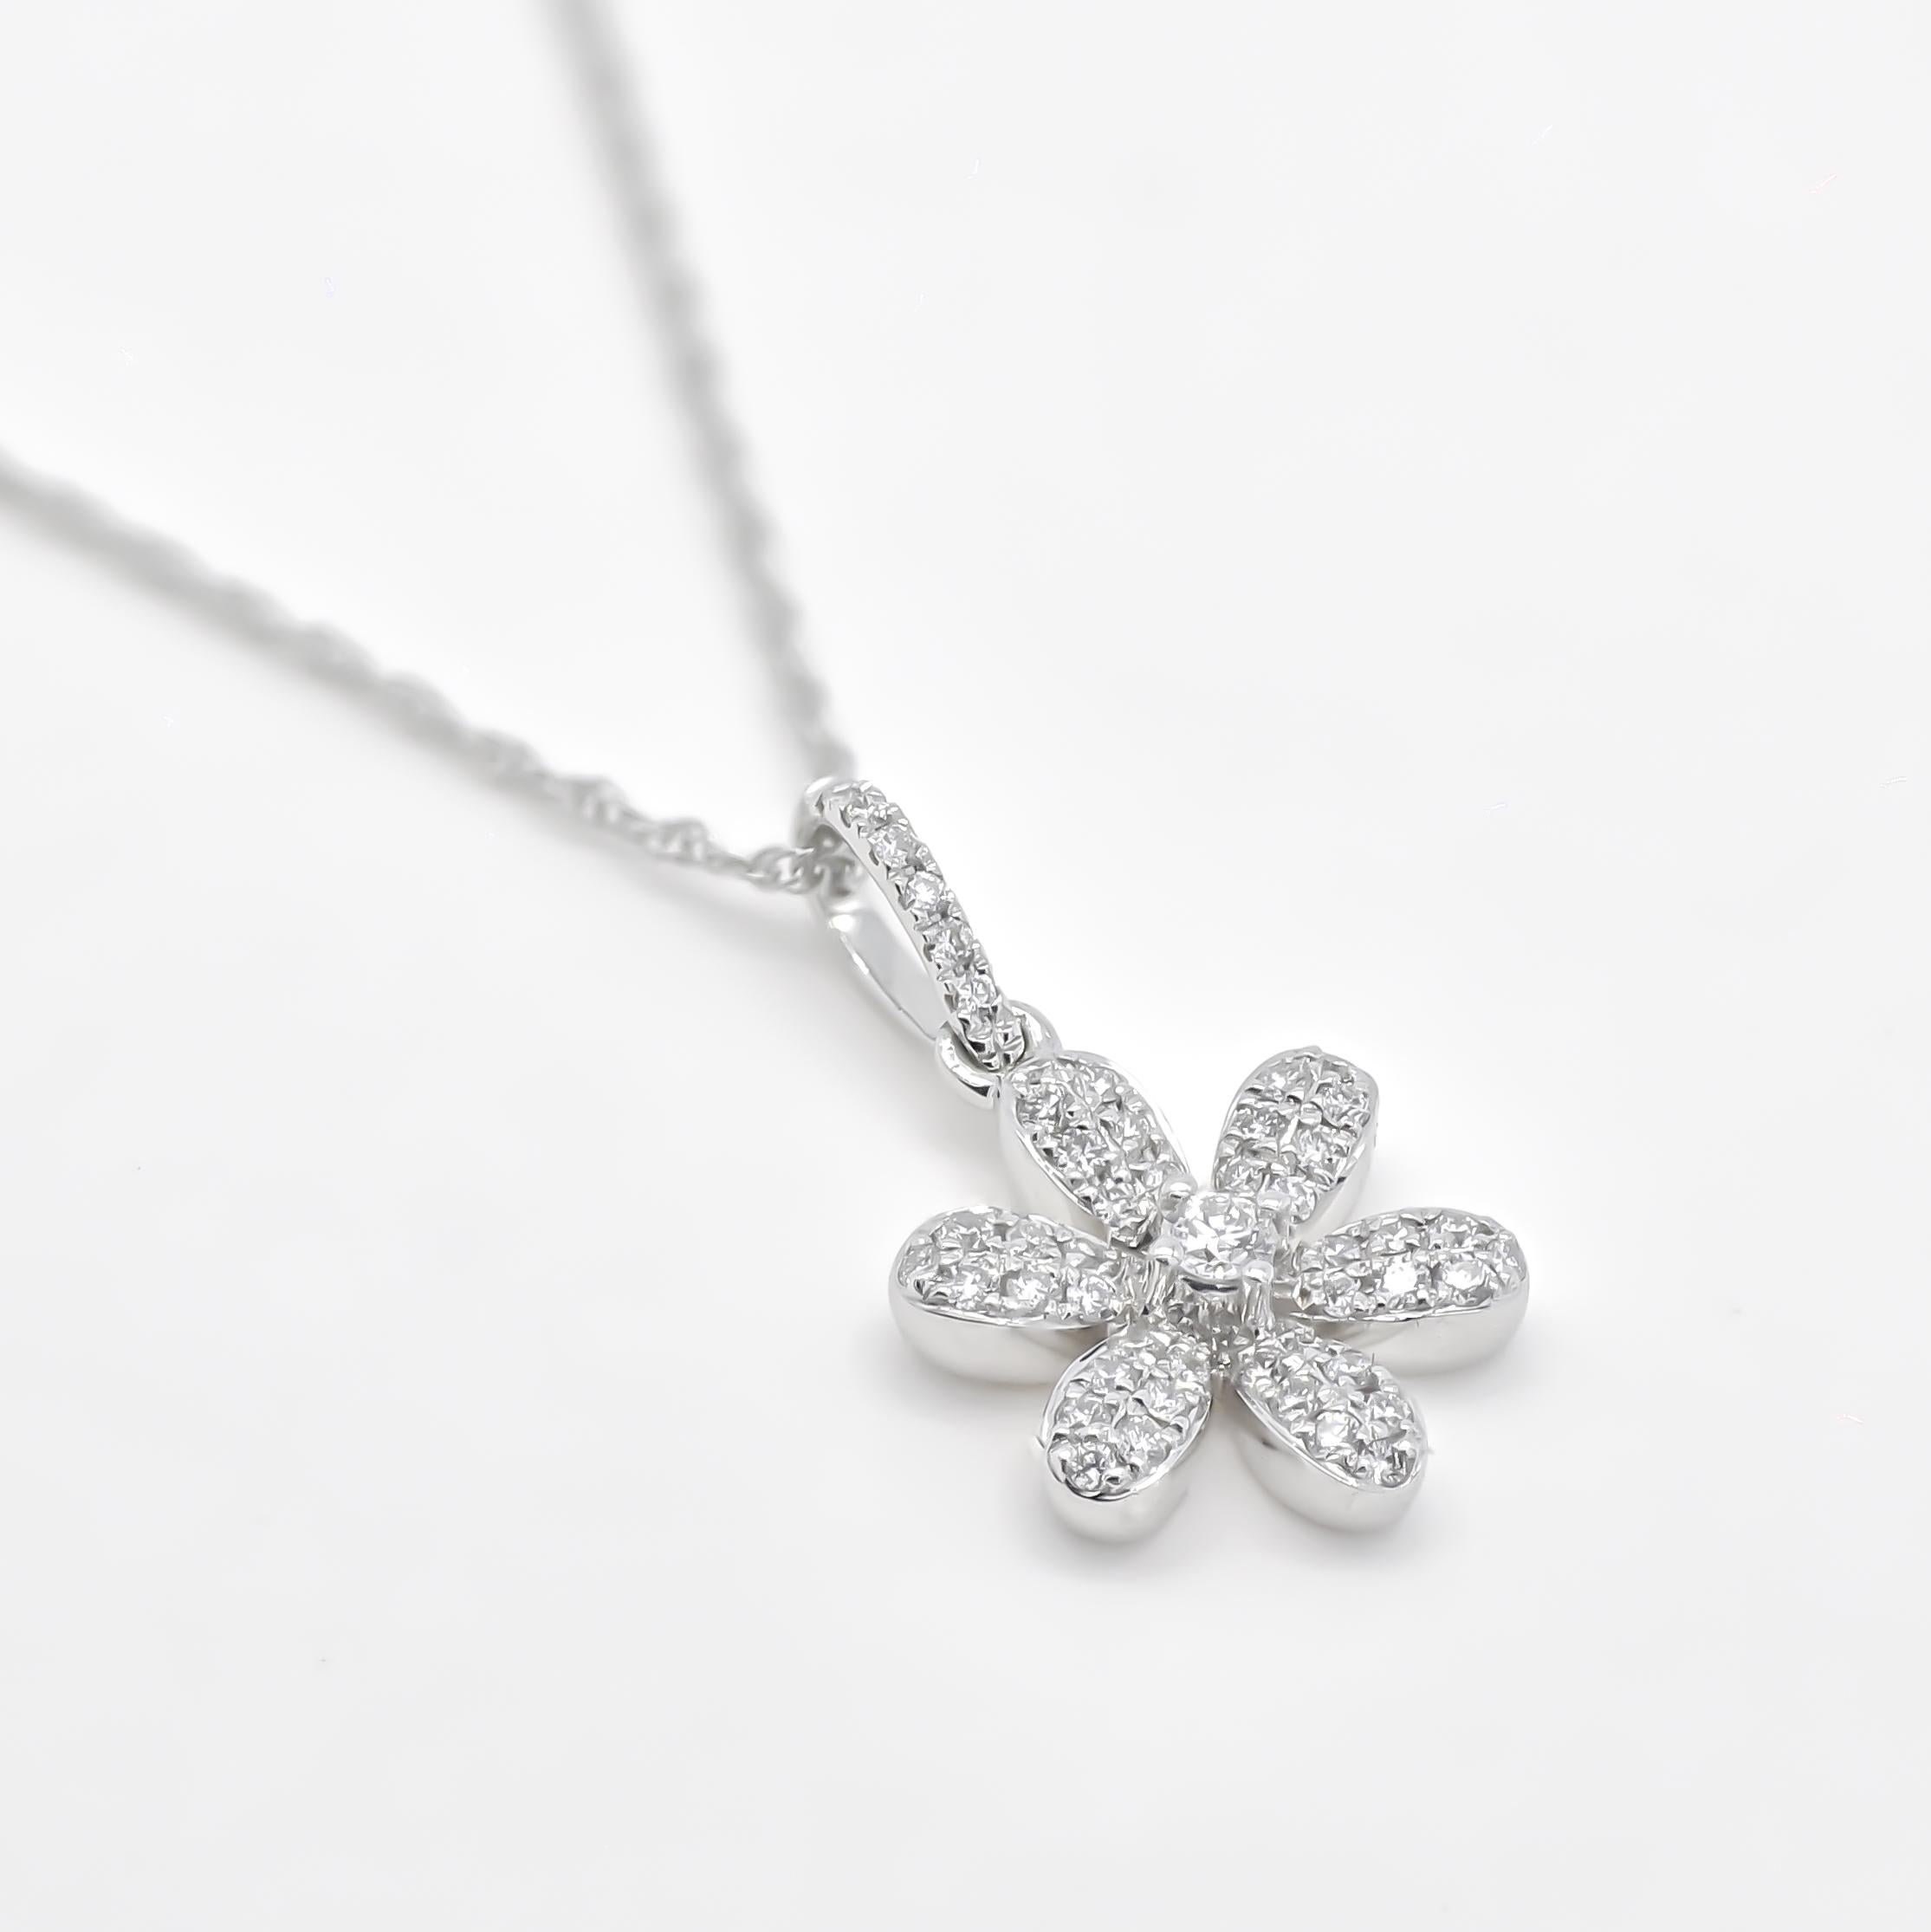 Spoil her with sparkle. This elegant pendant necklace features round-shape diamonds, set in a Cluster -style and suspended from a fine chain.

Make room in your life for elegance with these ultra-glam Floral cluster Pedant in brilliant white gold